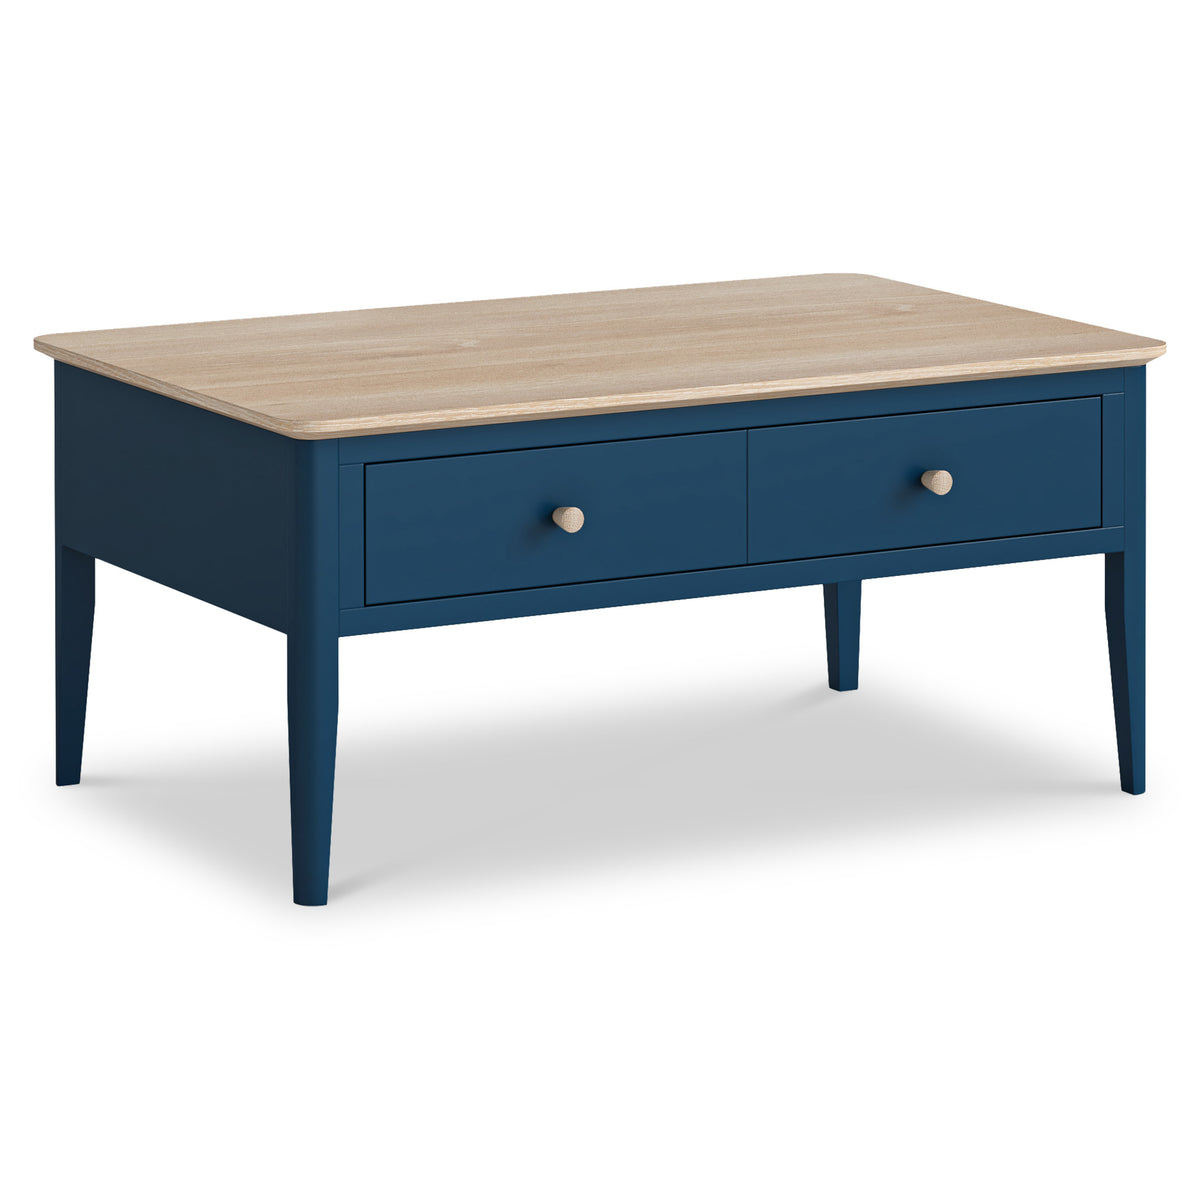 Penrose Navy Blue Coffee Table with wooden handles from Roseland Furniture